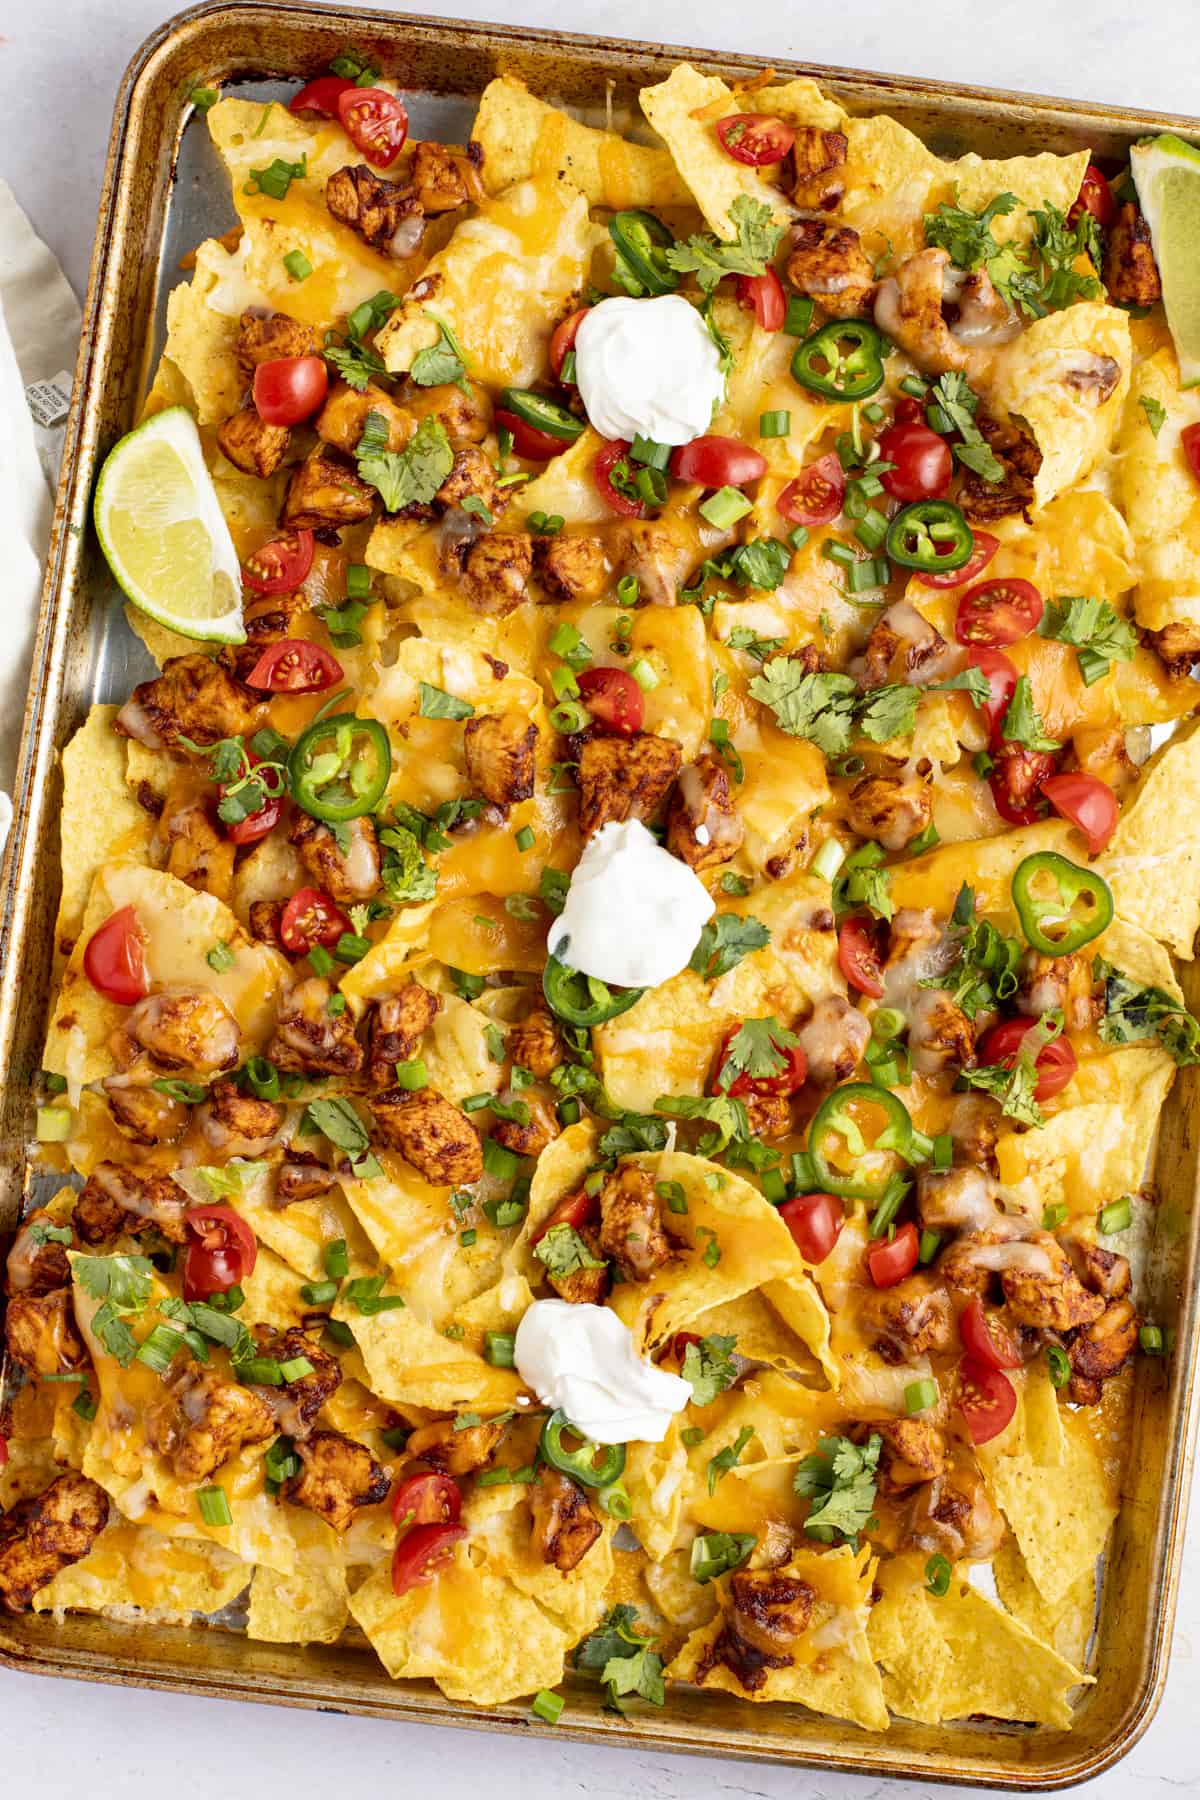 Love Chicken Nachos fresh from the oven with melty cheese